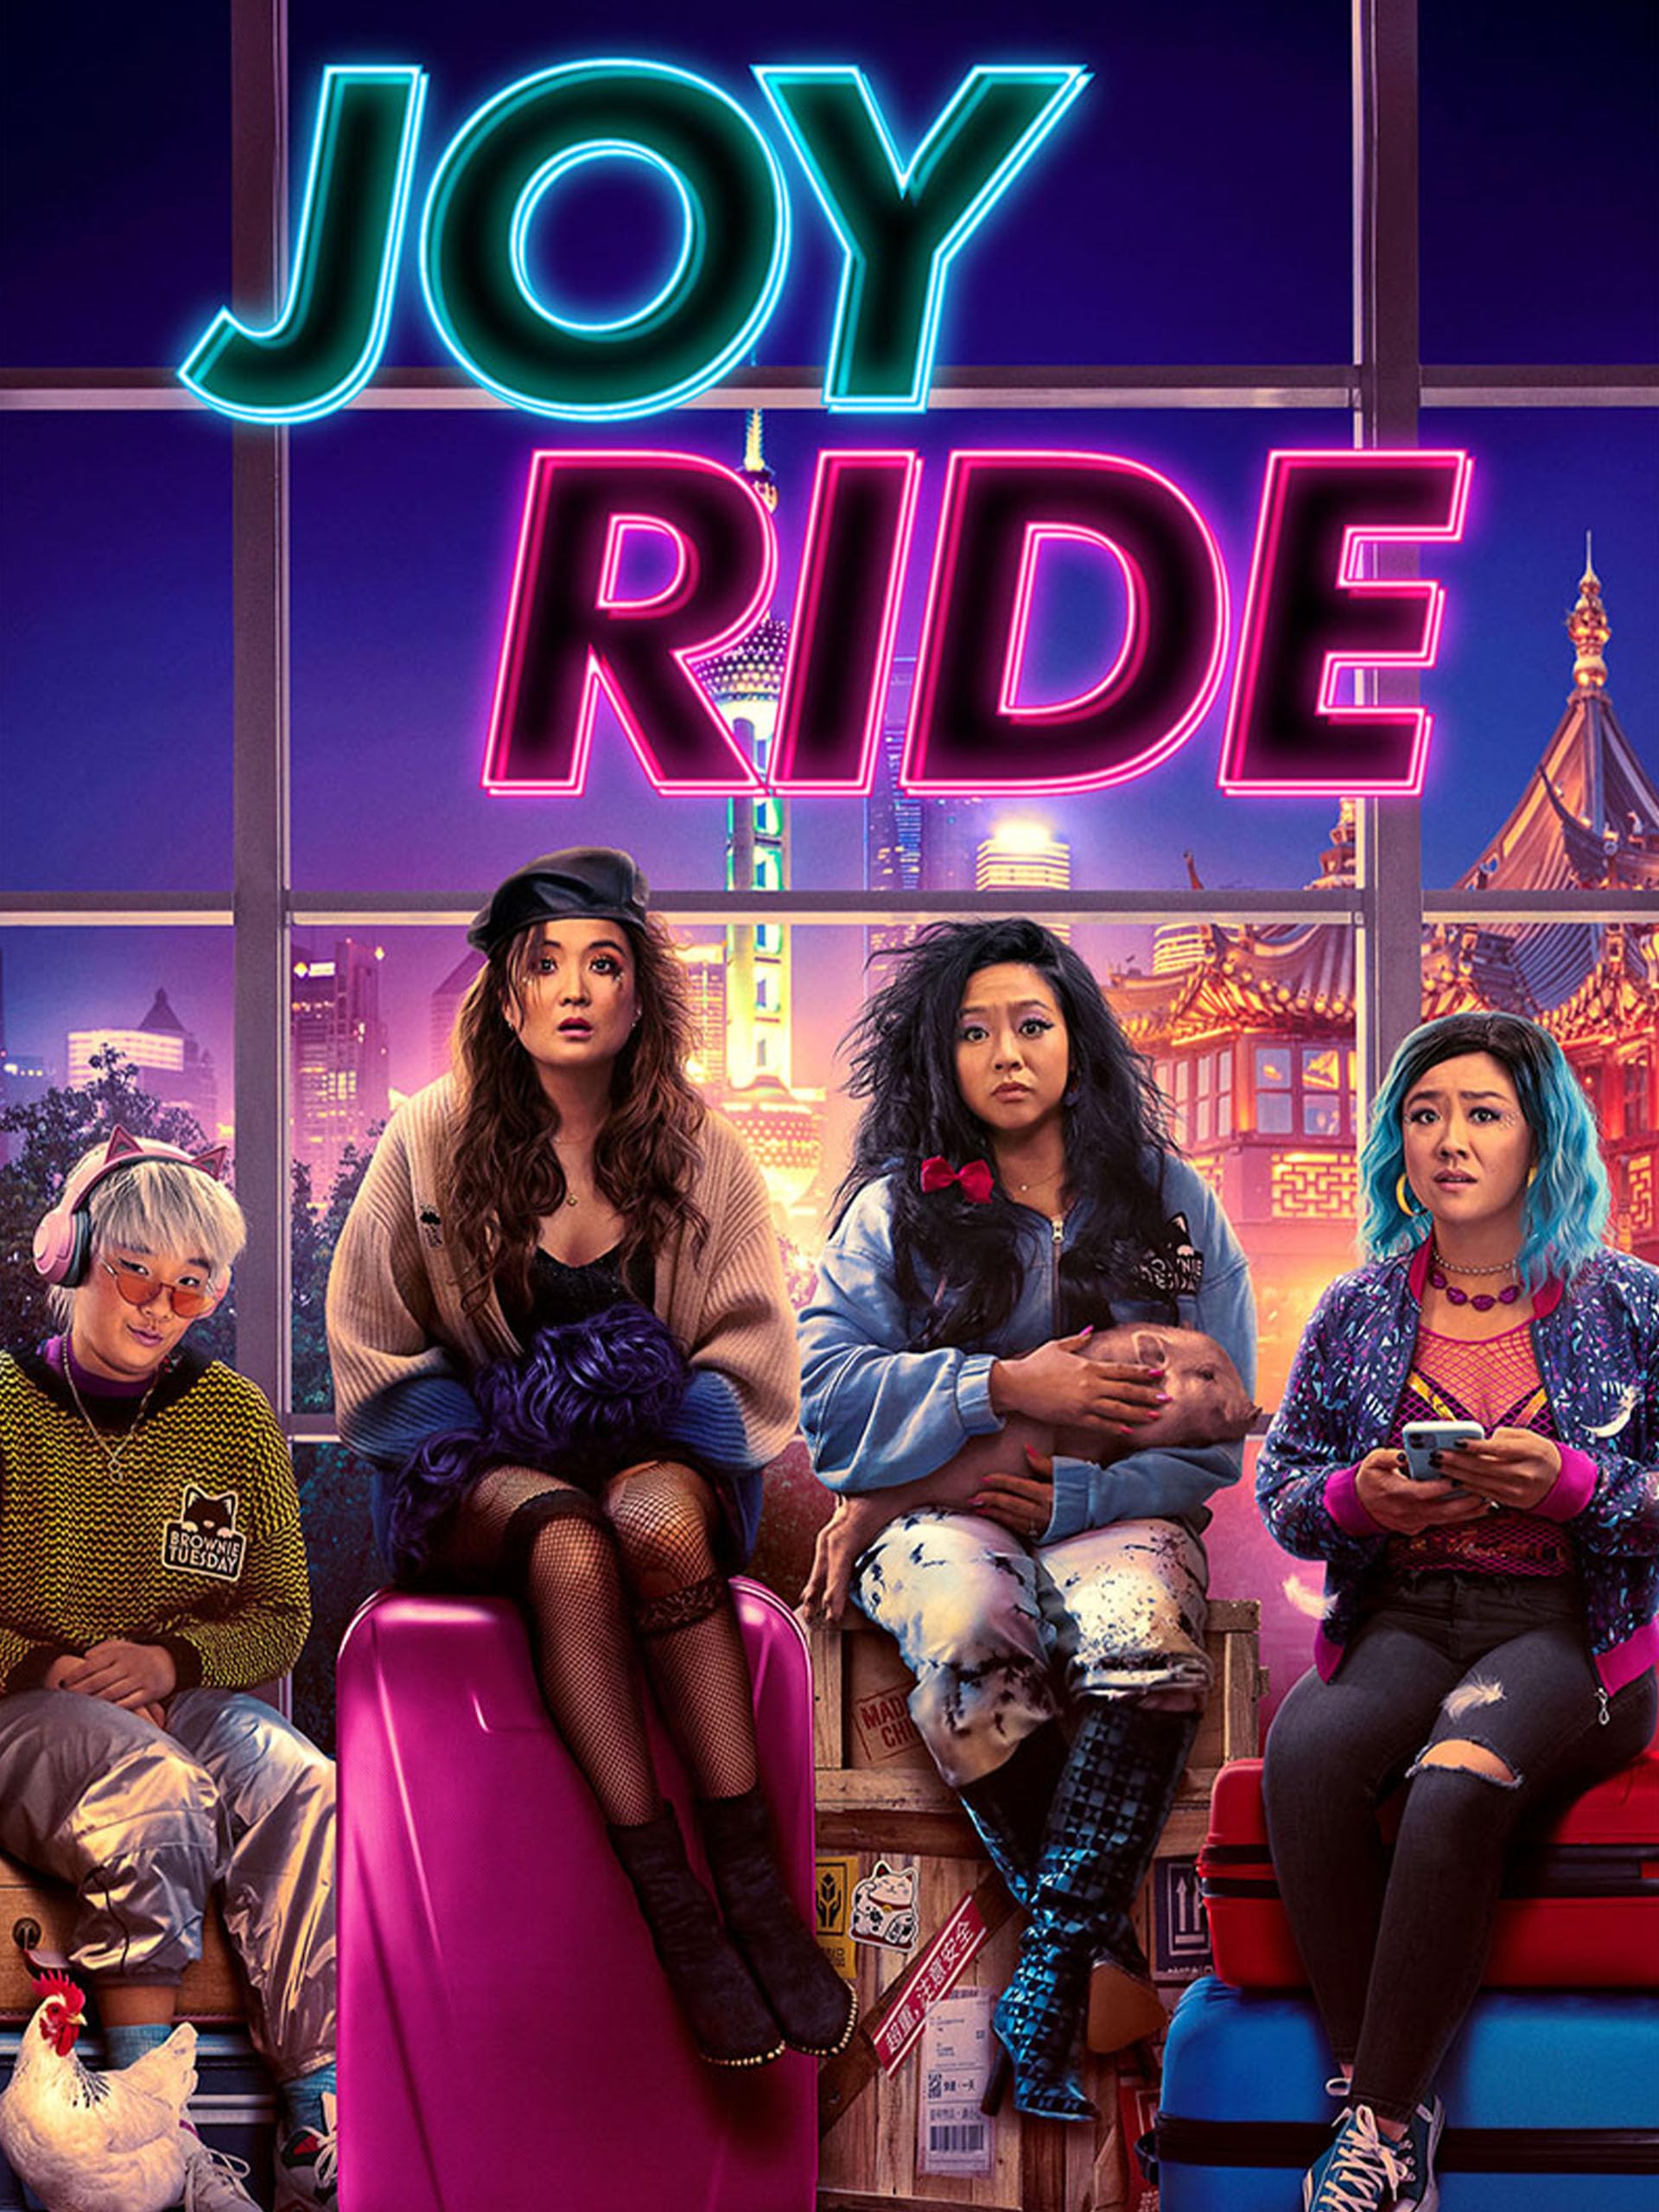 courtney lennon recommends joy ride movie online pic